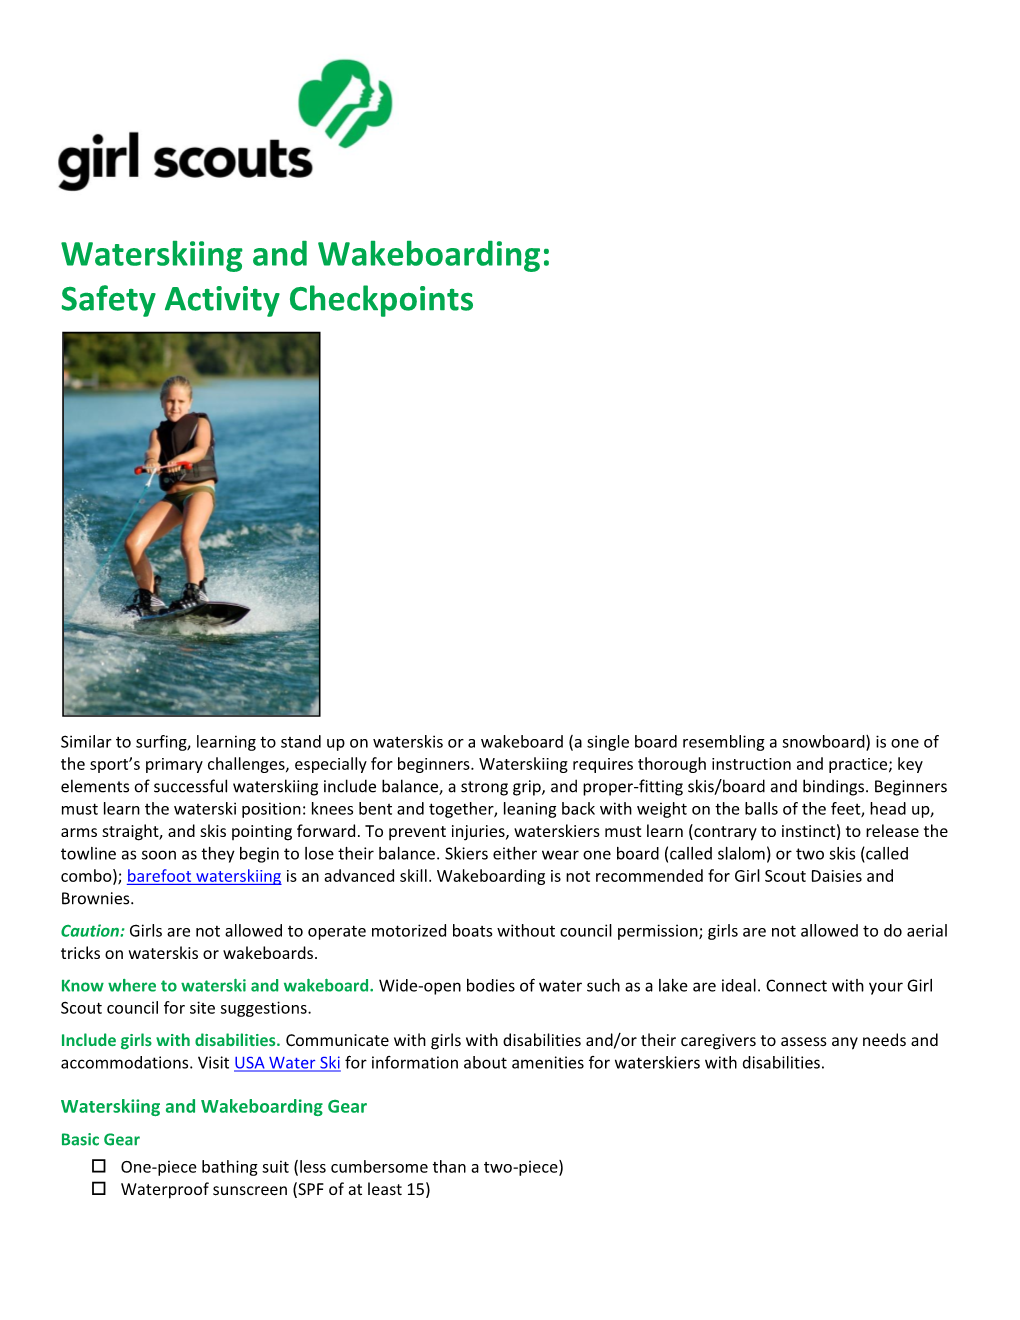 Waterskiing and Wakeboarding: Safety Activity Checkpoints